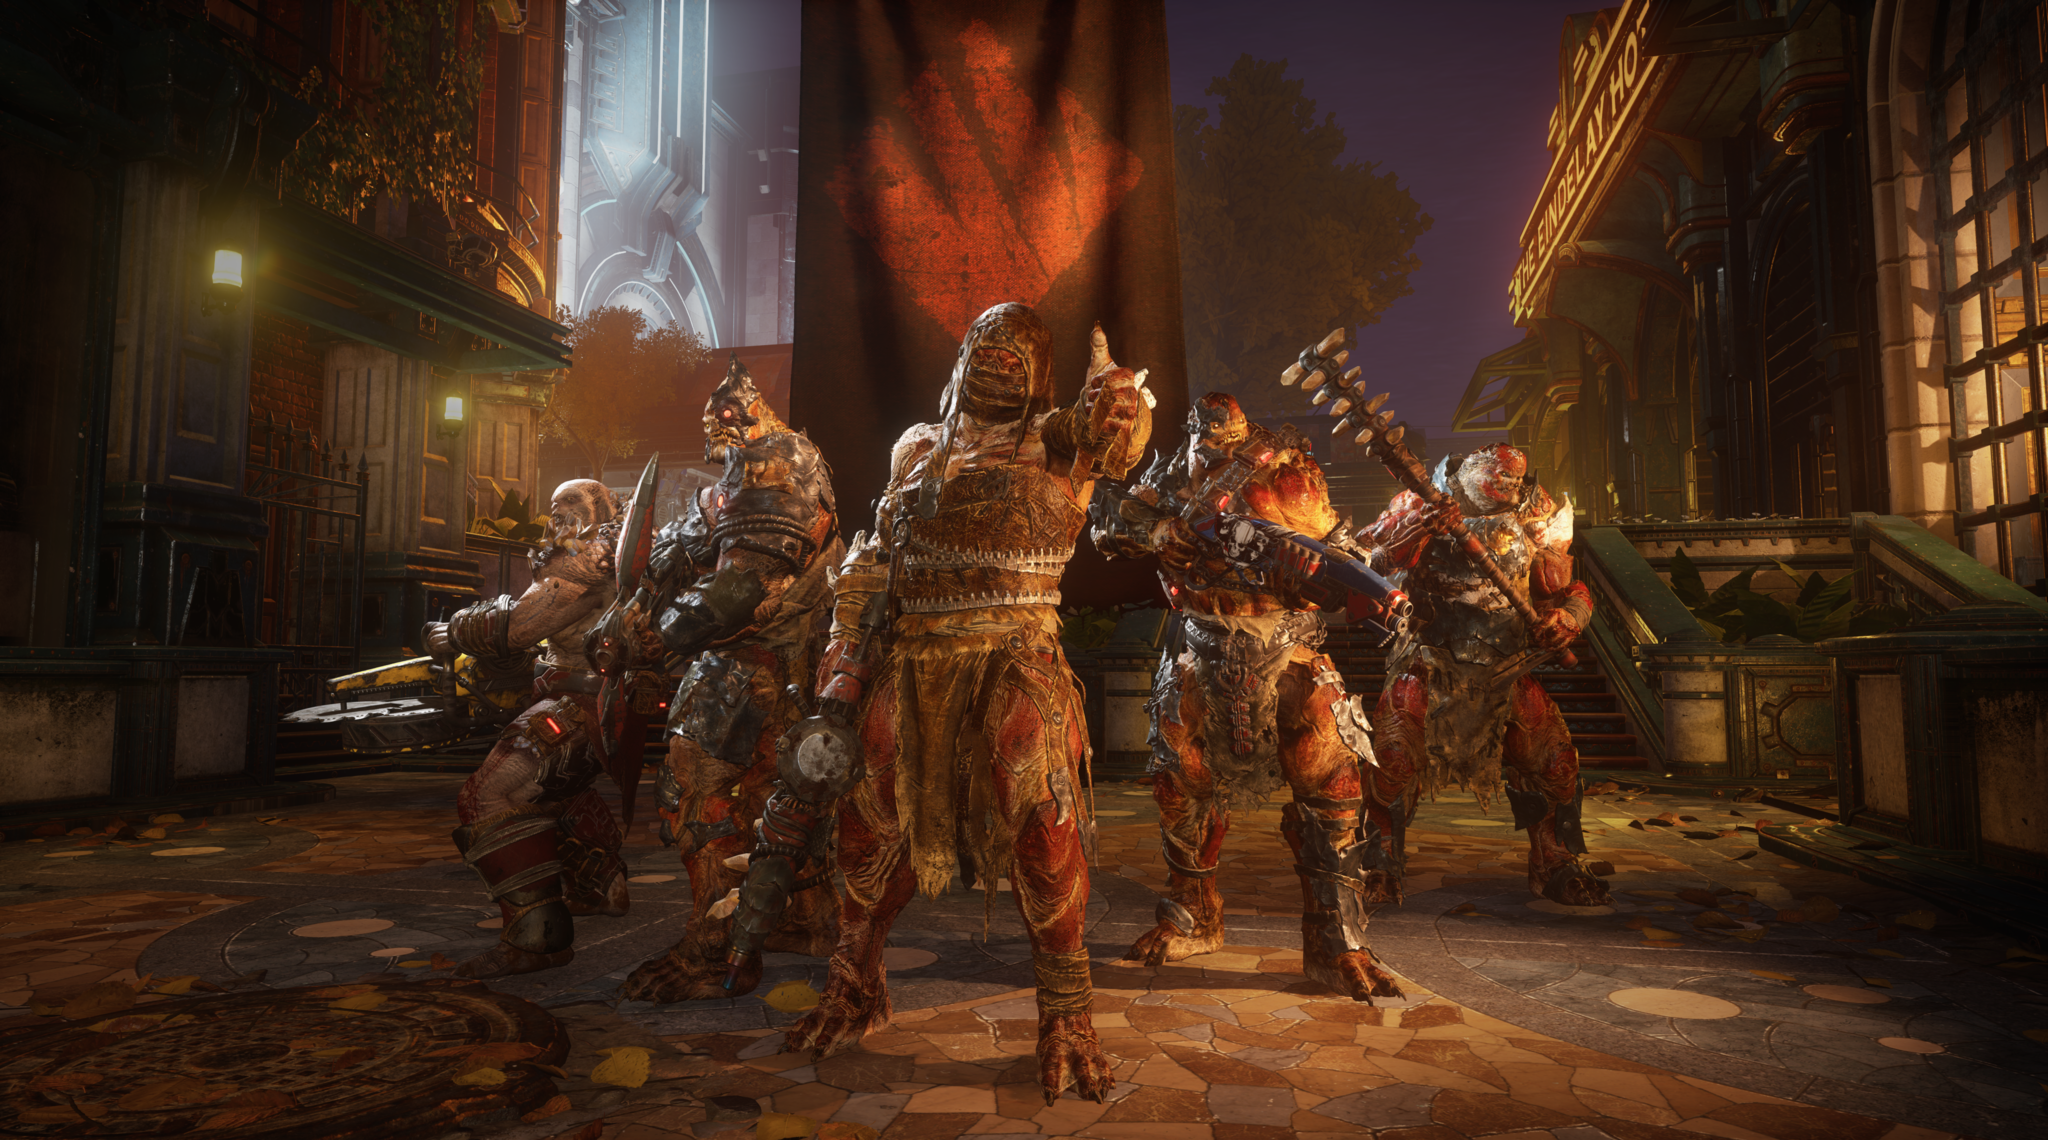 Gears 5 Horde Mode Revamps with Ultimates, Cross Platform and Halo: Reach